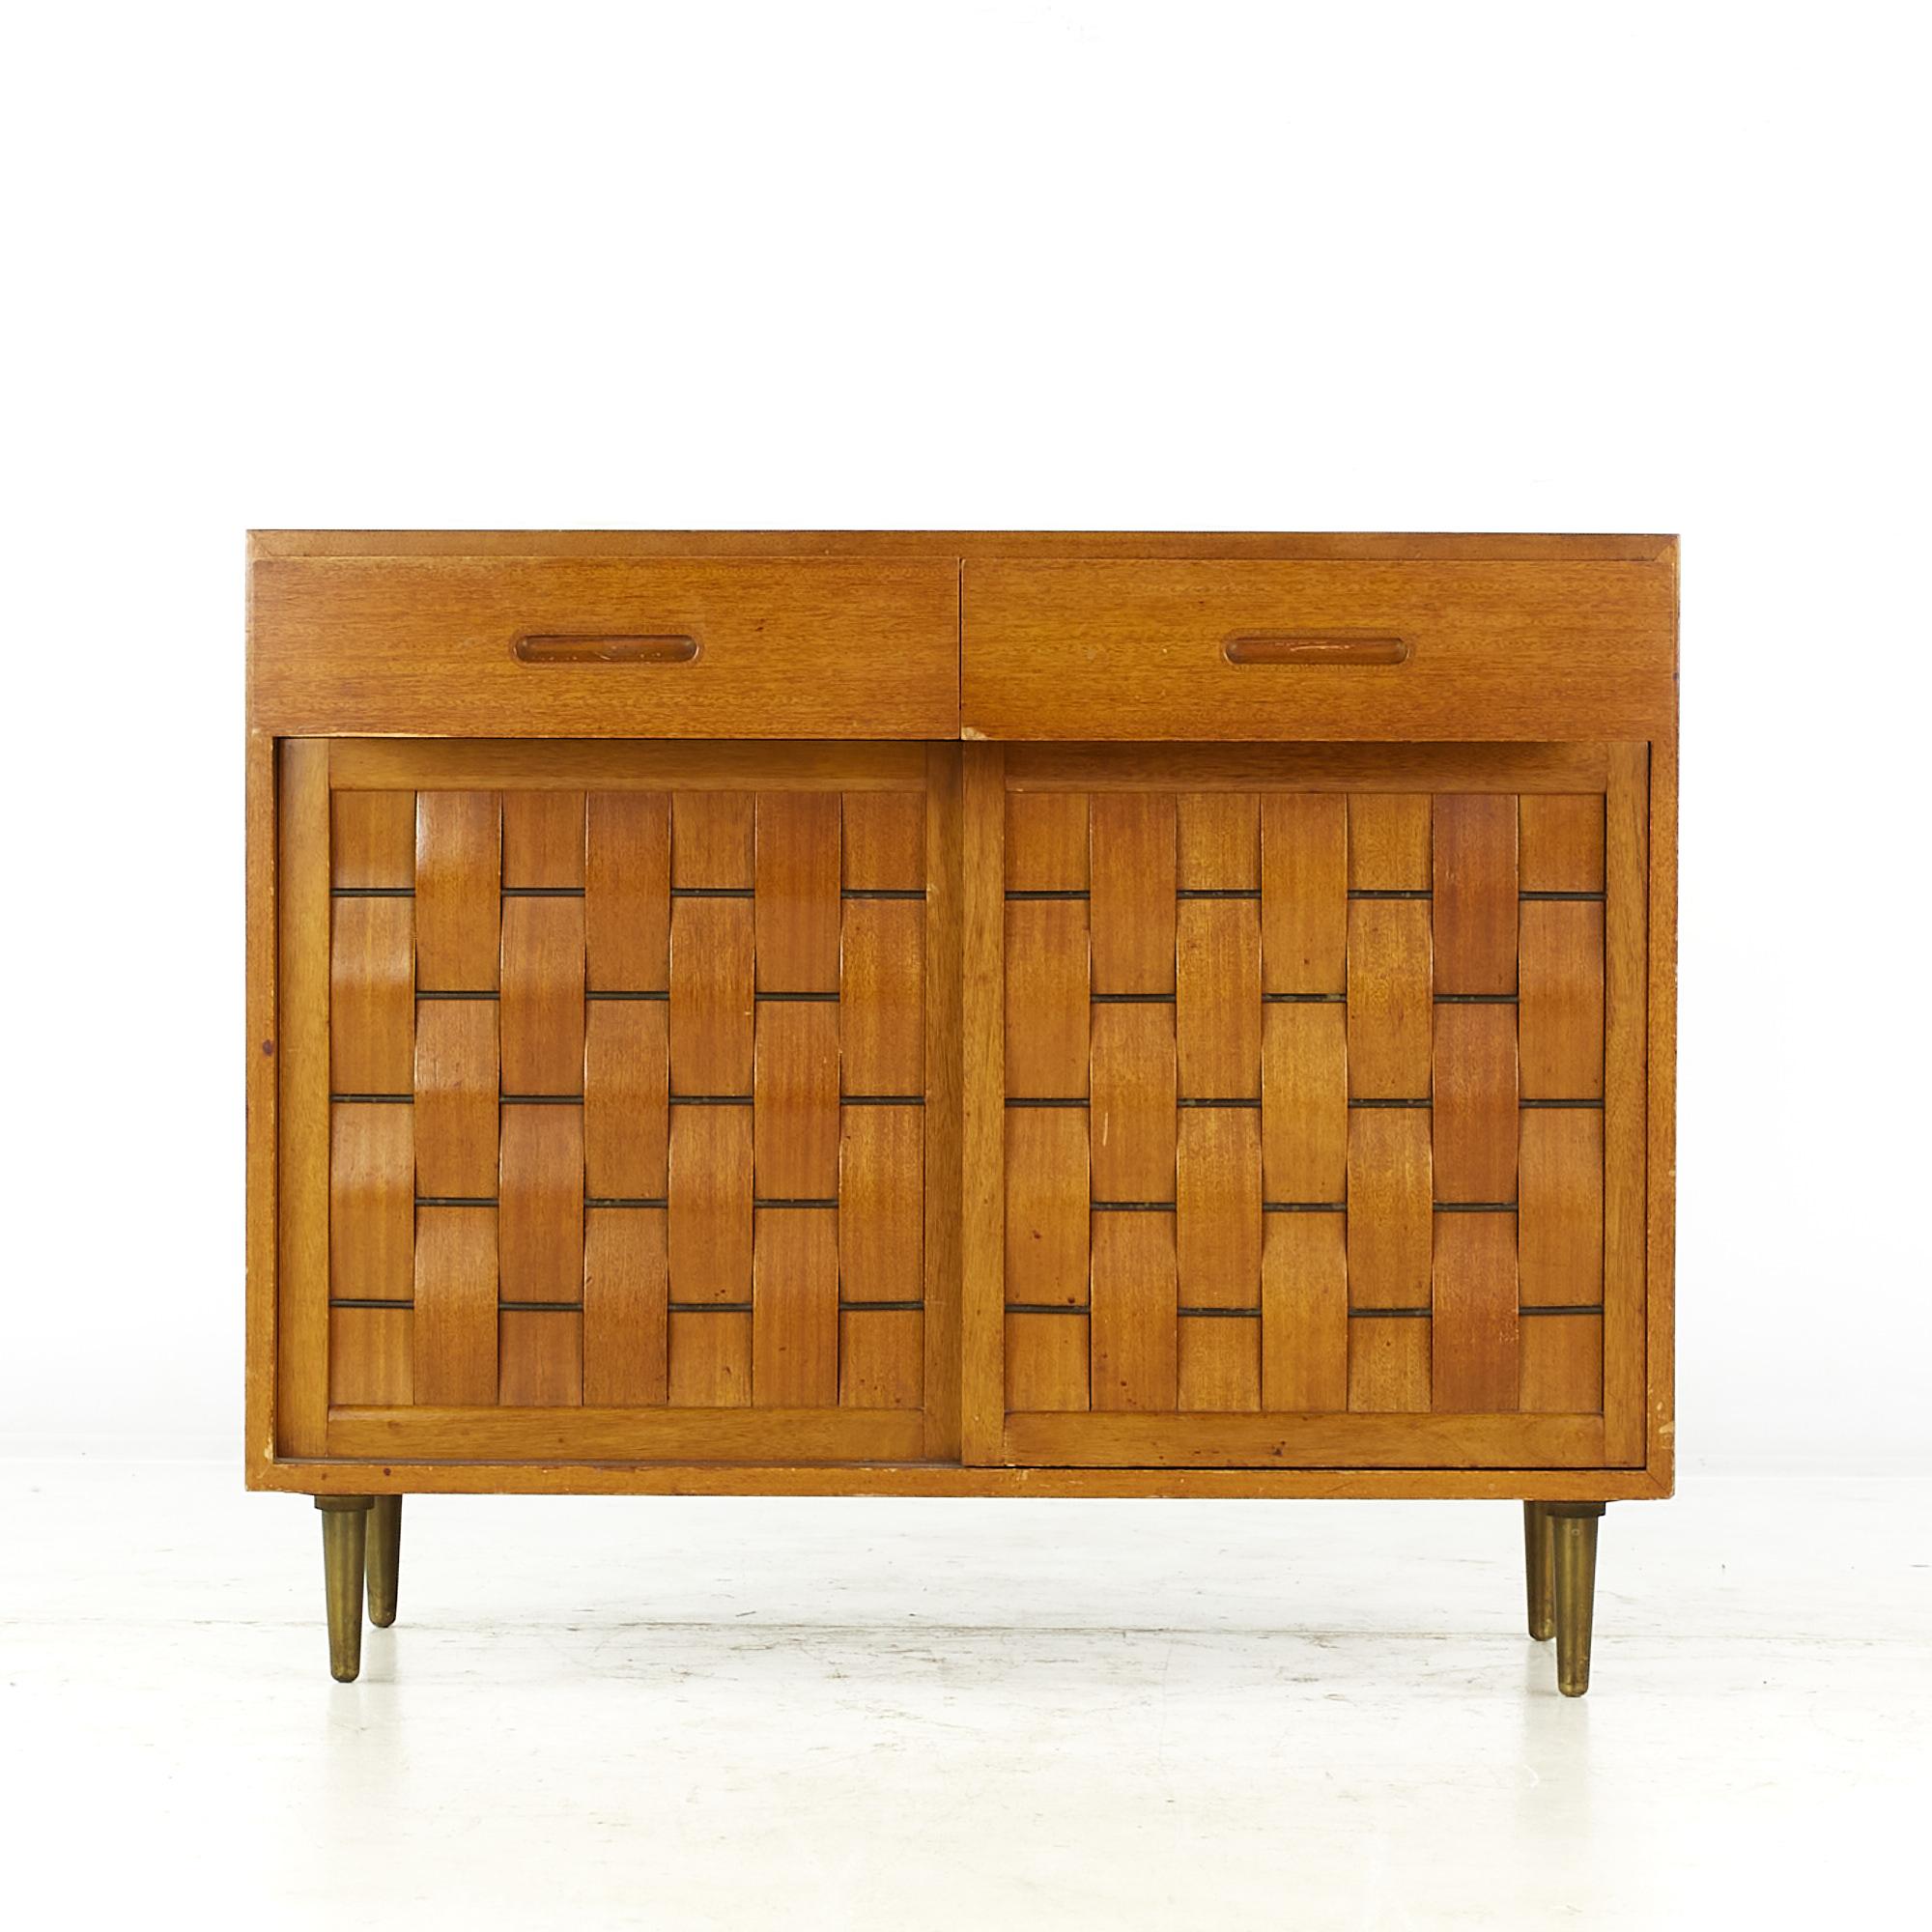 Edward Wormley for Dunbar Mid Century Bleached Mahogany Sliding Door Credenza

This credenza measures: 41.5 wide x 18 deep x 34 inches high

All pieces of furniture can be had in what we call restored vintage condition. That means the piece is